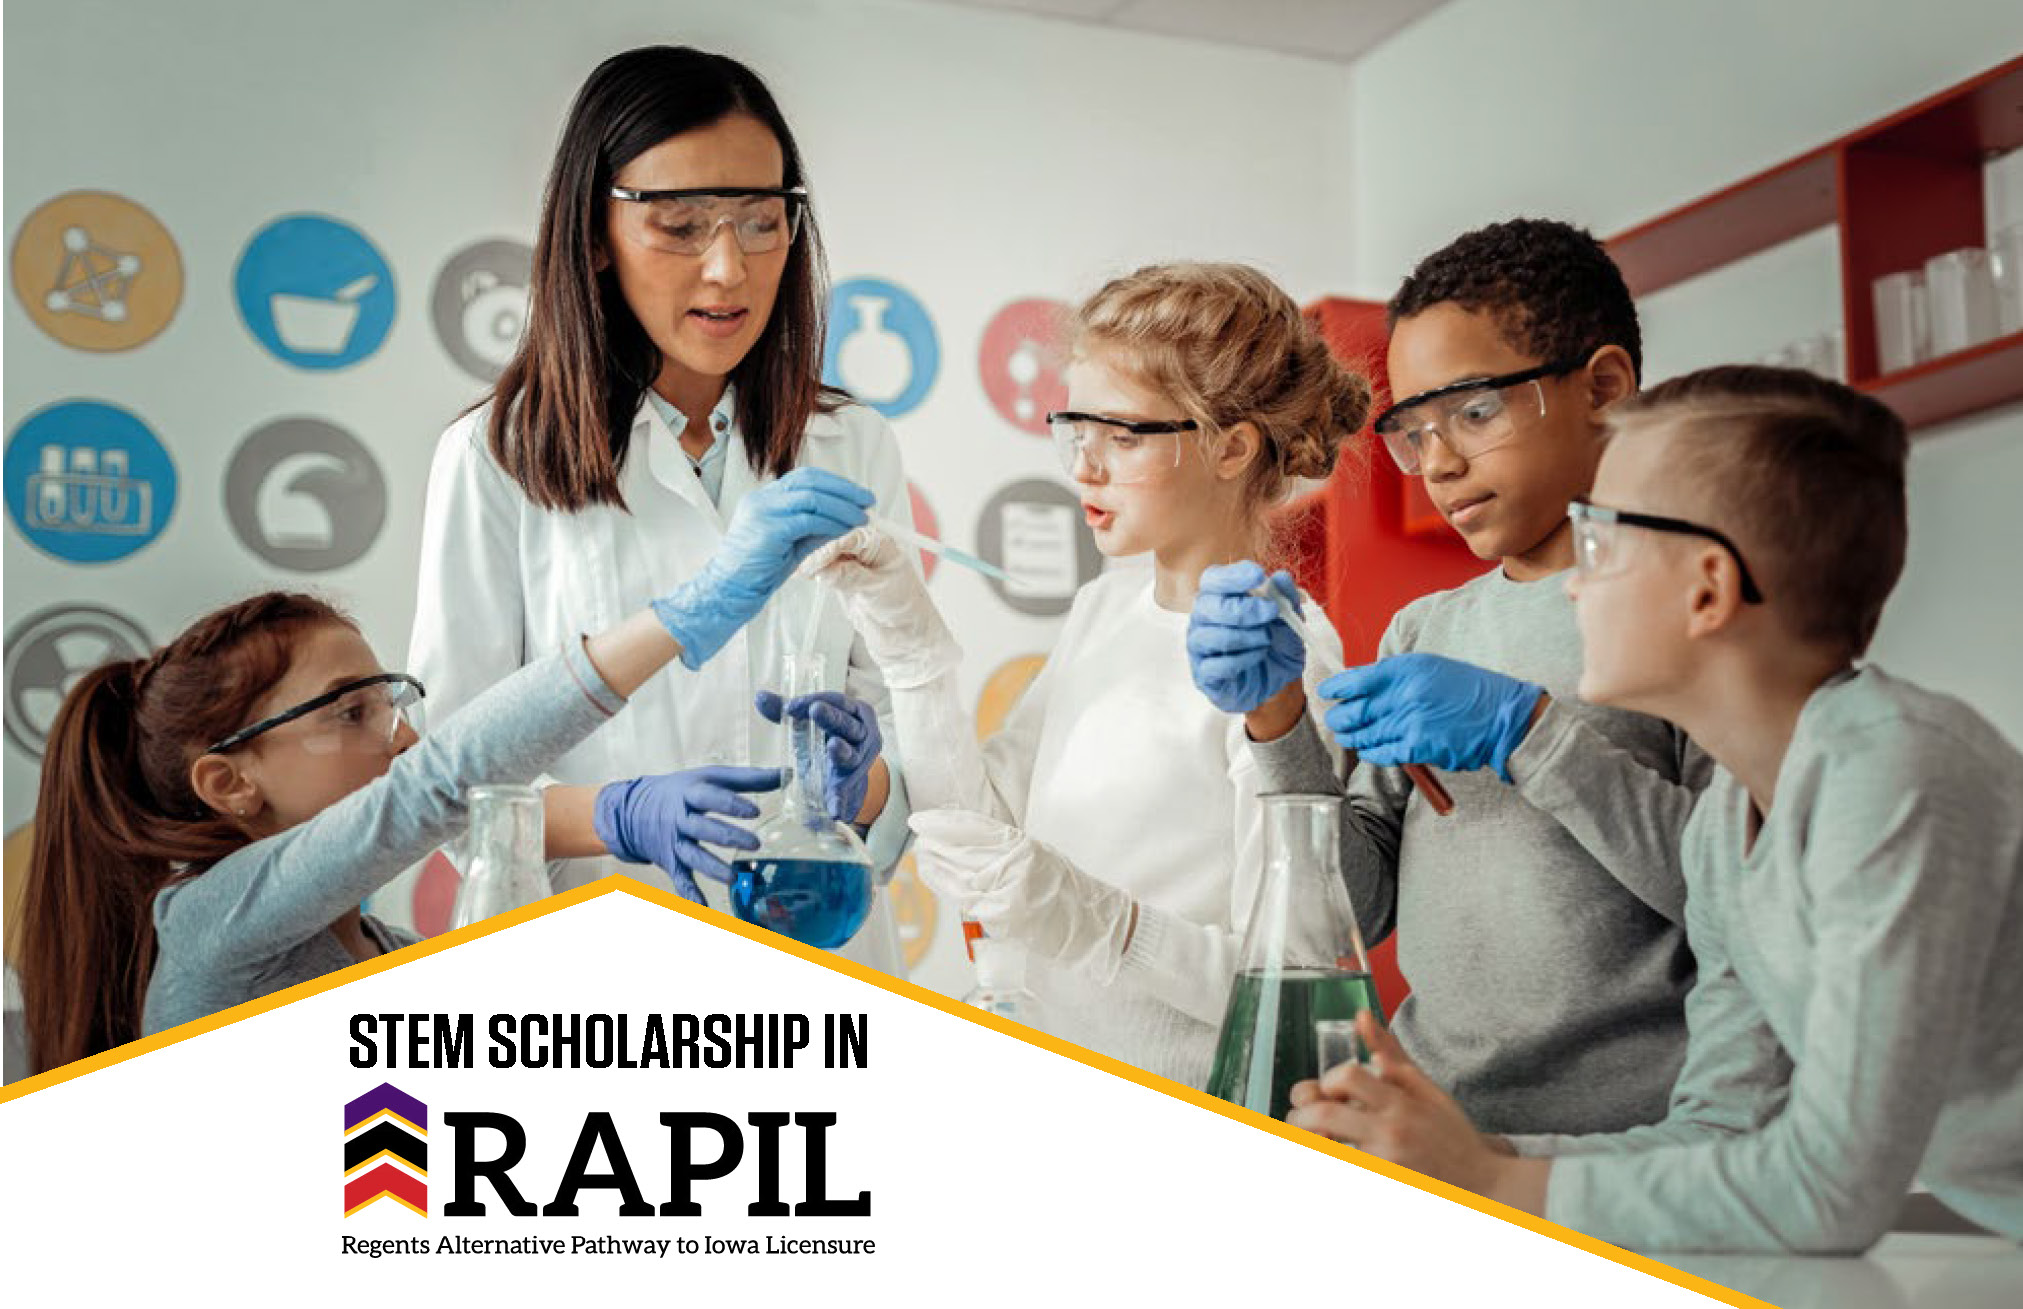 Scholarships for the RAPIL Program are now available through the STEM Council for professionals interested in teaching STEM.